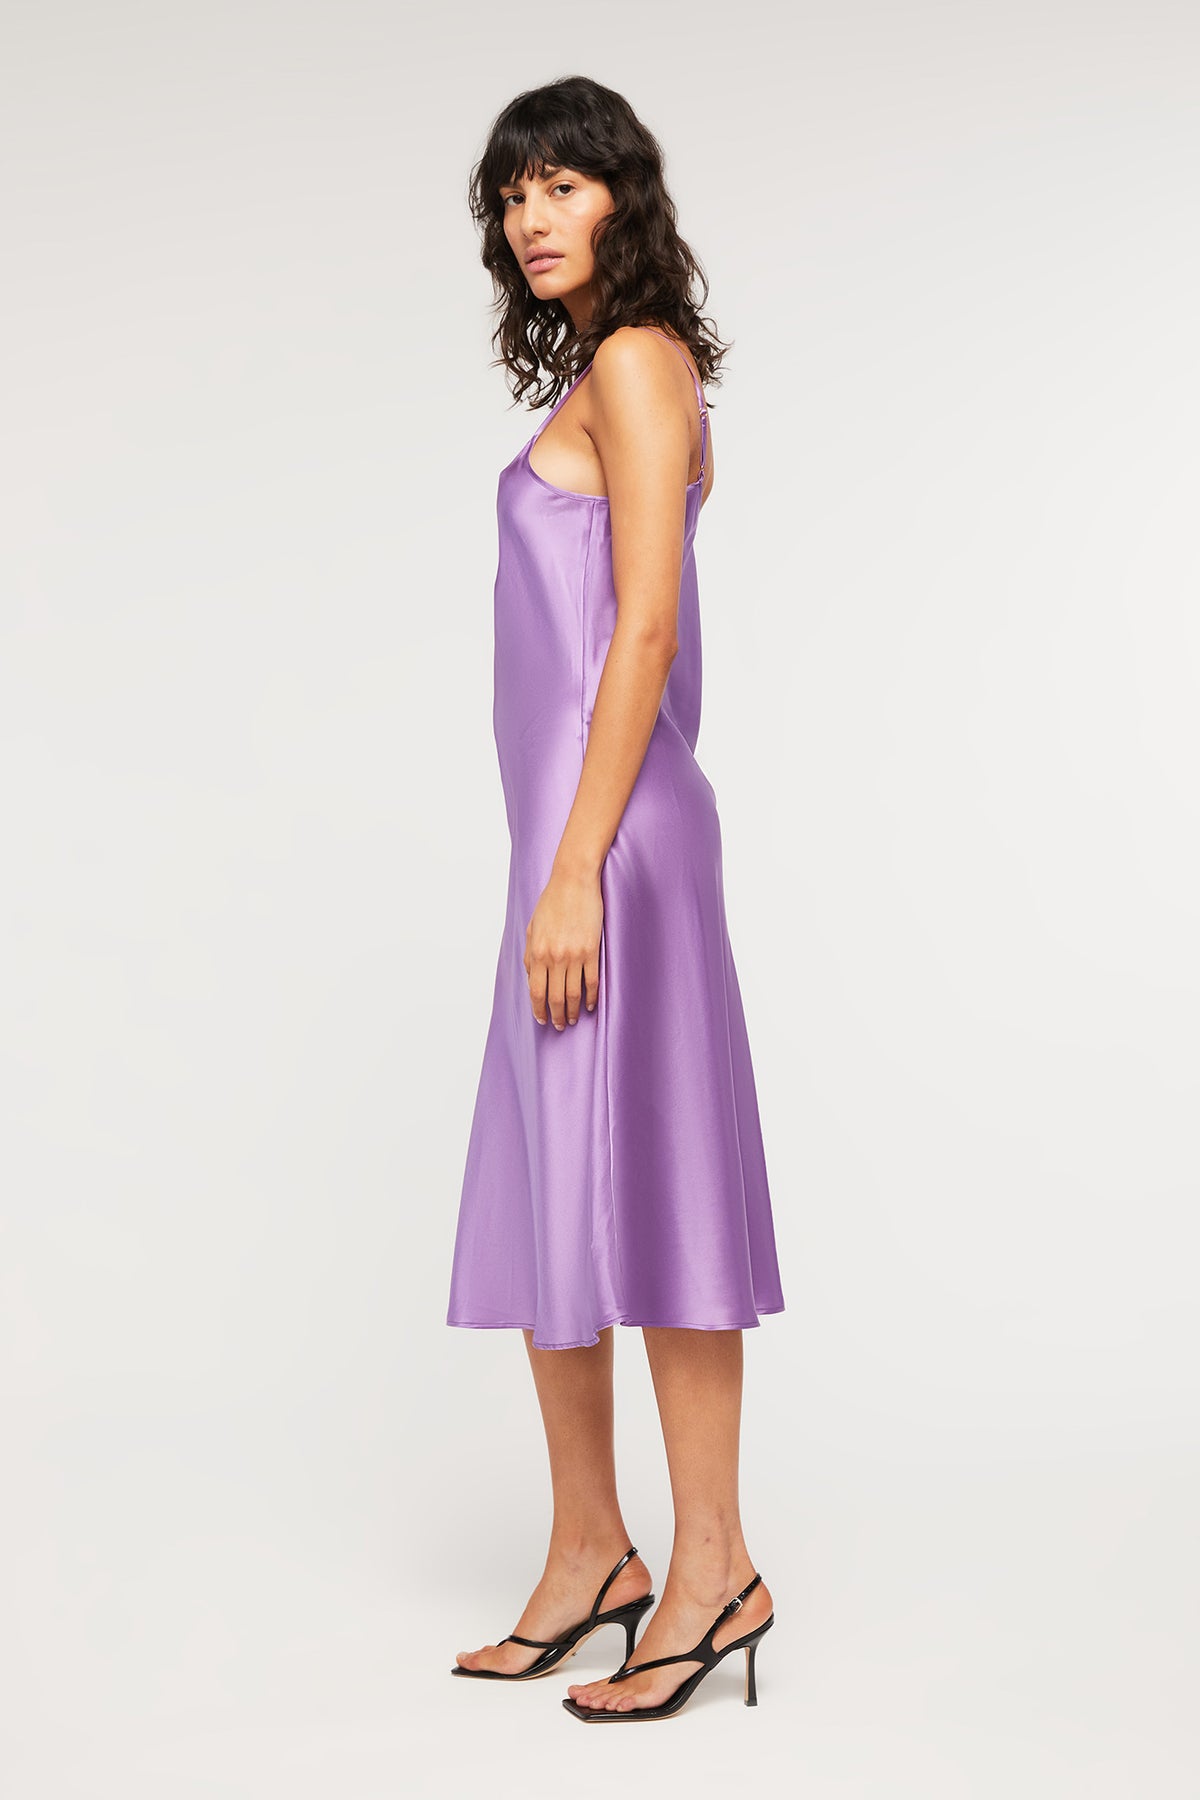 Crafted from pure silk, the Delilah Slip in Amethyst is a luxurious long slip from Ginia RTW